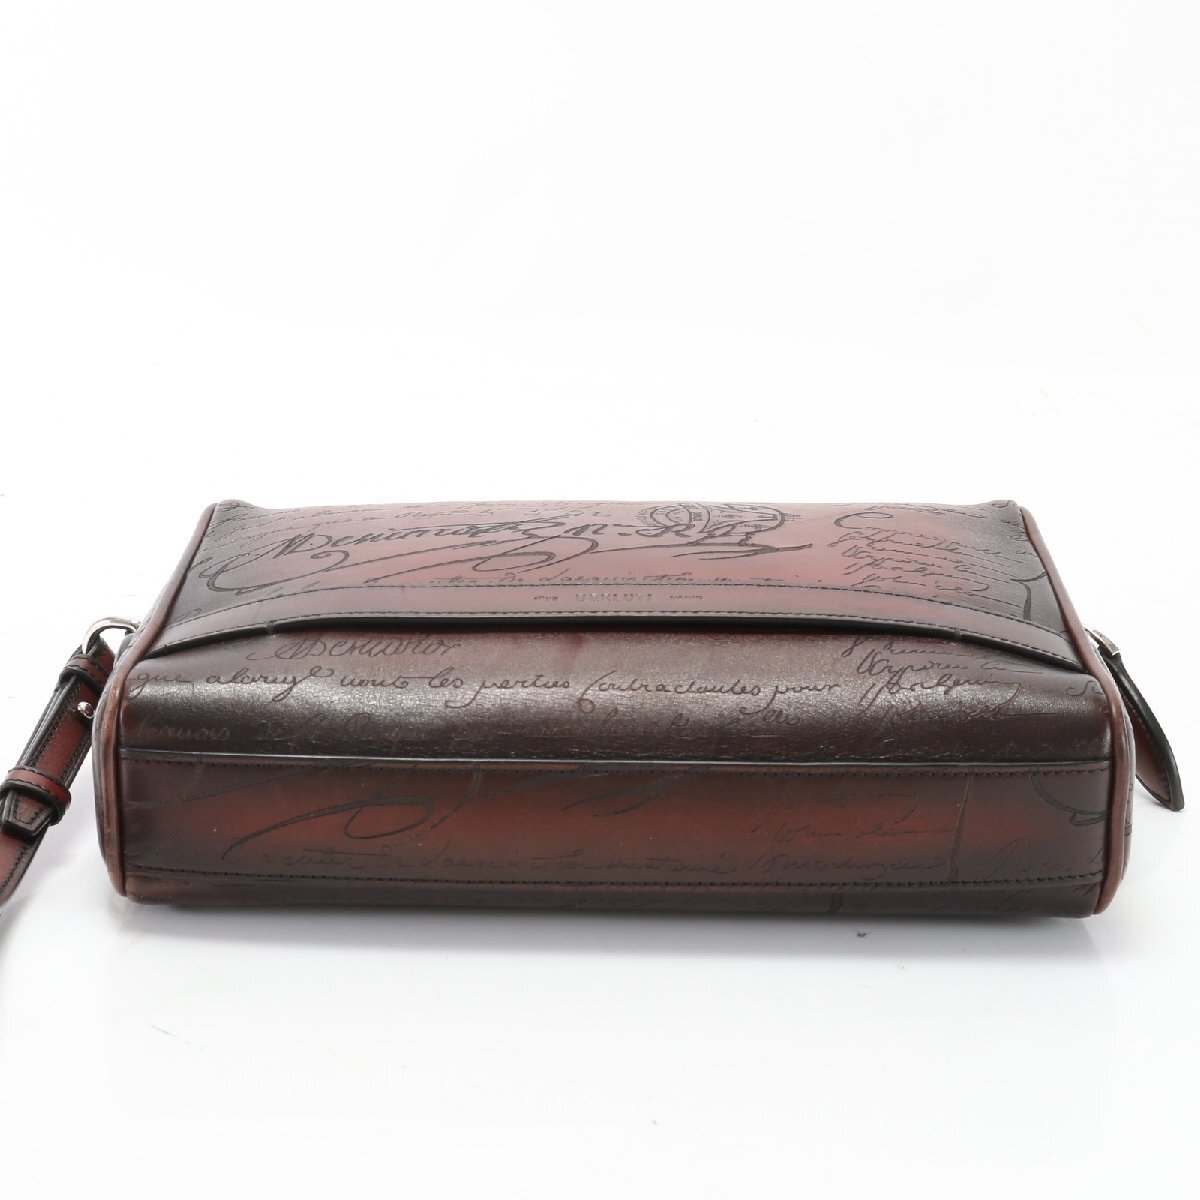 1 jpy # ultimate beautiful goods # Berluti # rose wood sklito leather second bag clutch Brown document pouch commuting original leather men's EEM W7-5